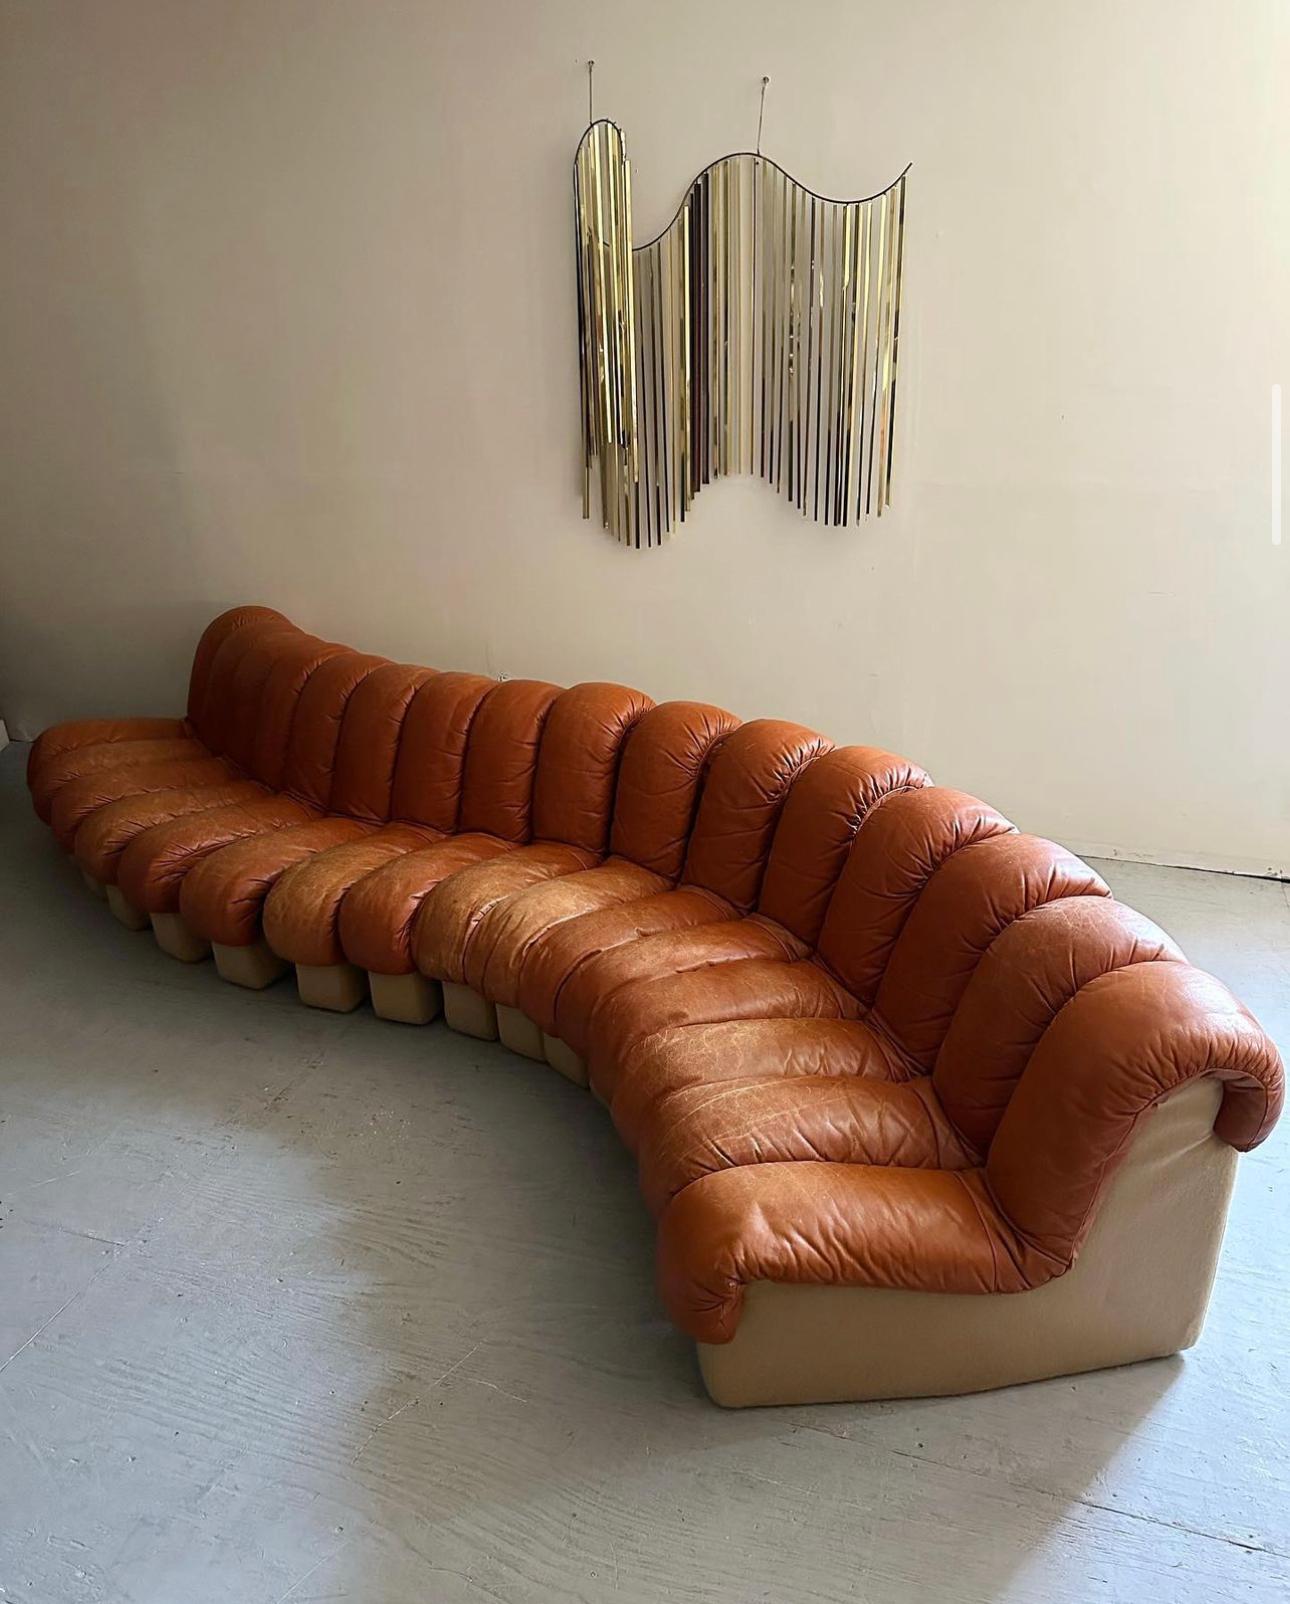 A monumental midcentury Classic designed in collaboration by Ueli Bergere, Elenora Peduzzi-Riva, Heinz Ulrich and Klaus Vogt at De Sede, Switzerland. Comes wrapped in a cognac colored leather upholstery. This modular sectional sofa with endless